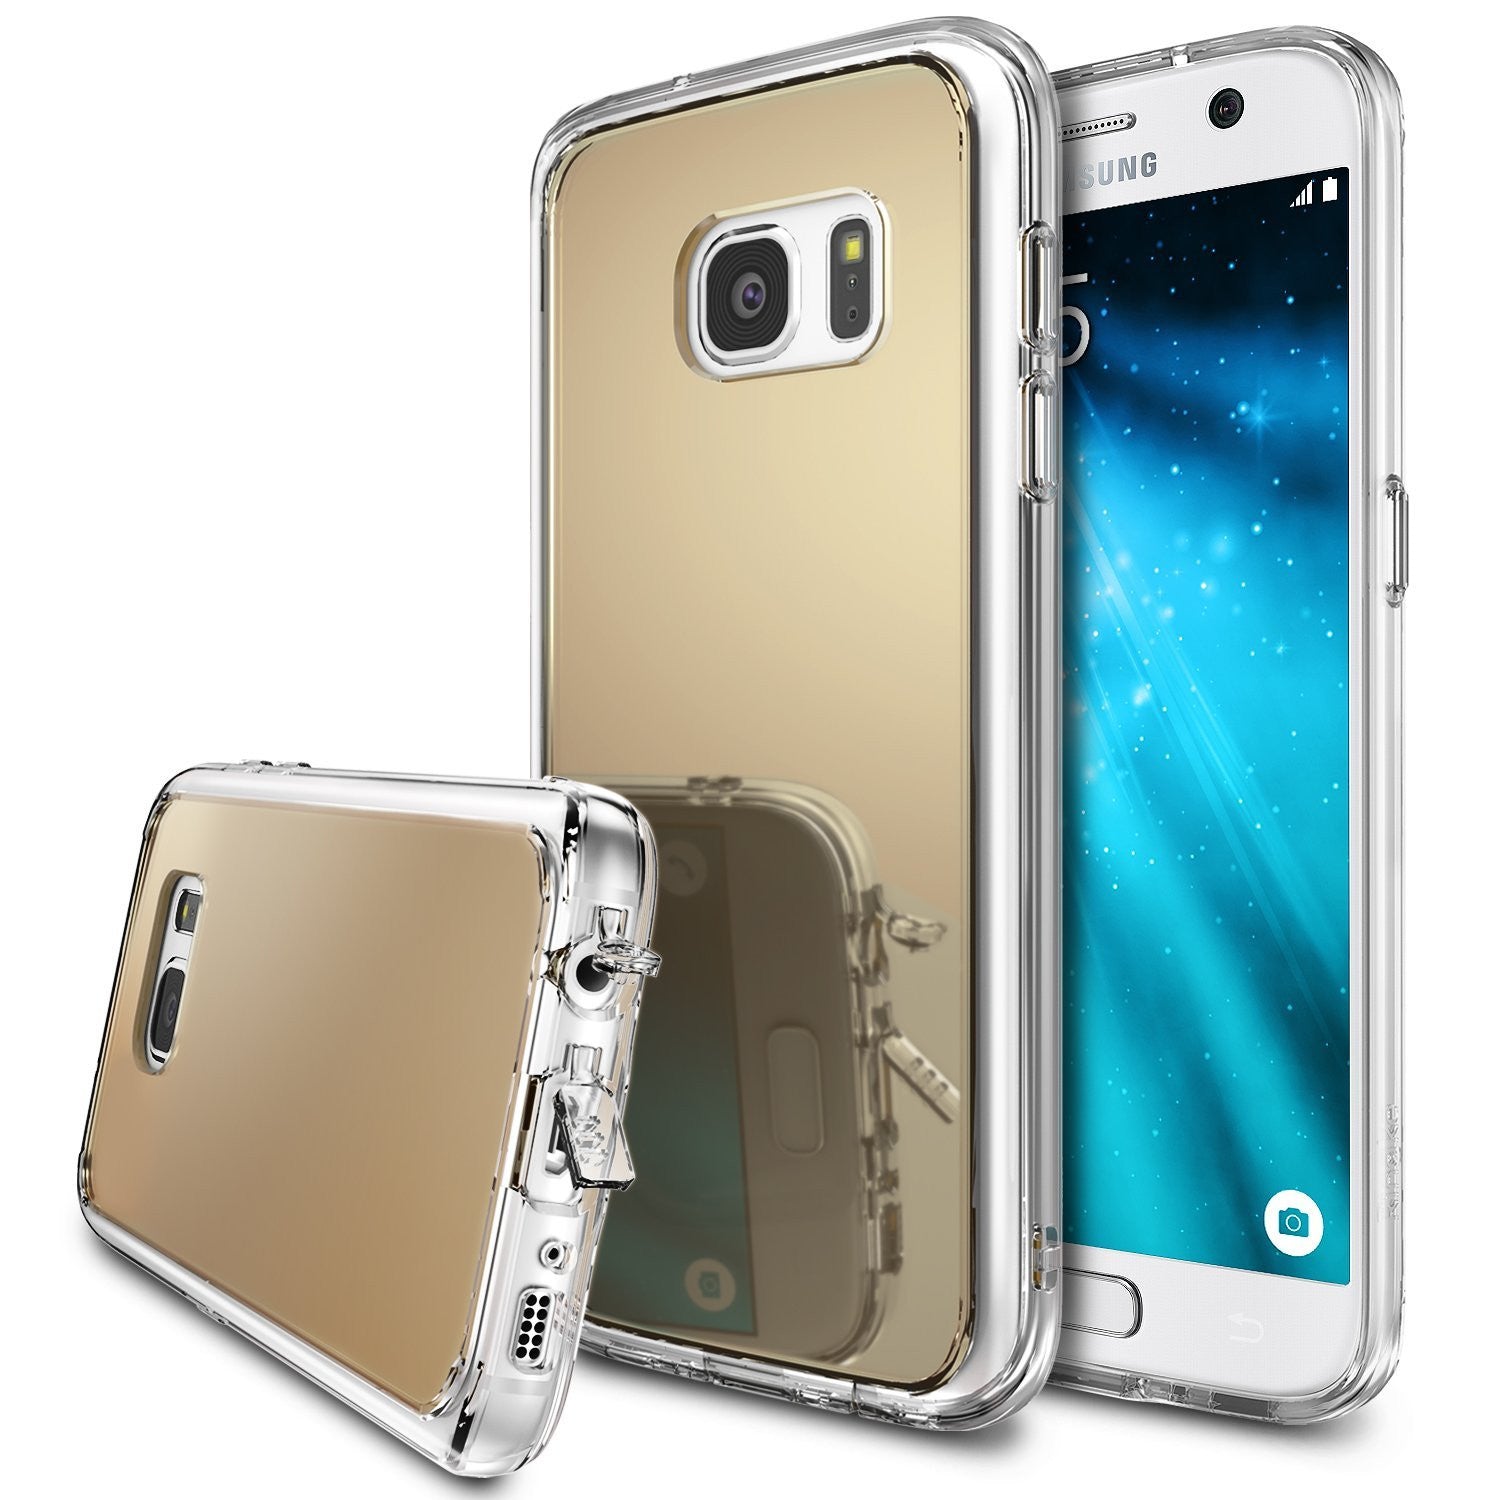 ringke mirror back cover case for galaxy s7 royal gold